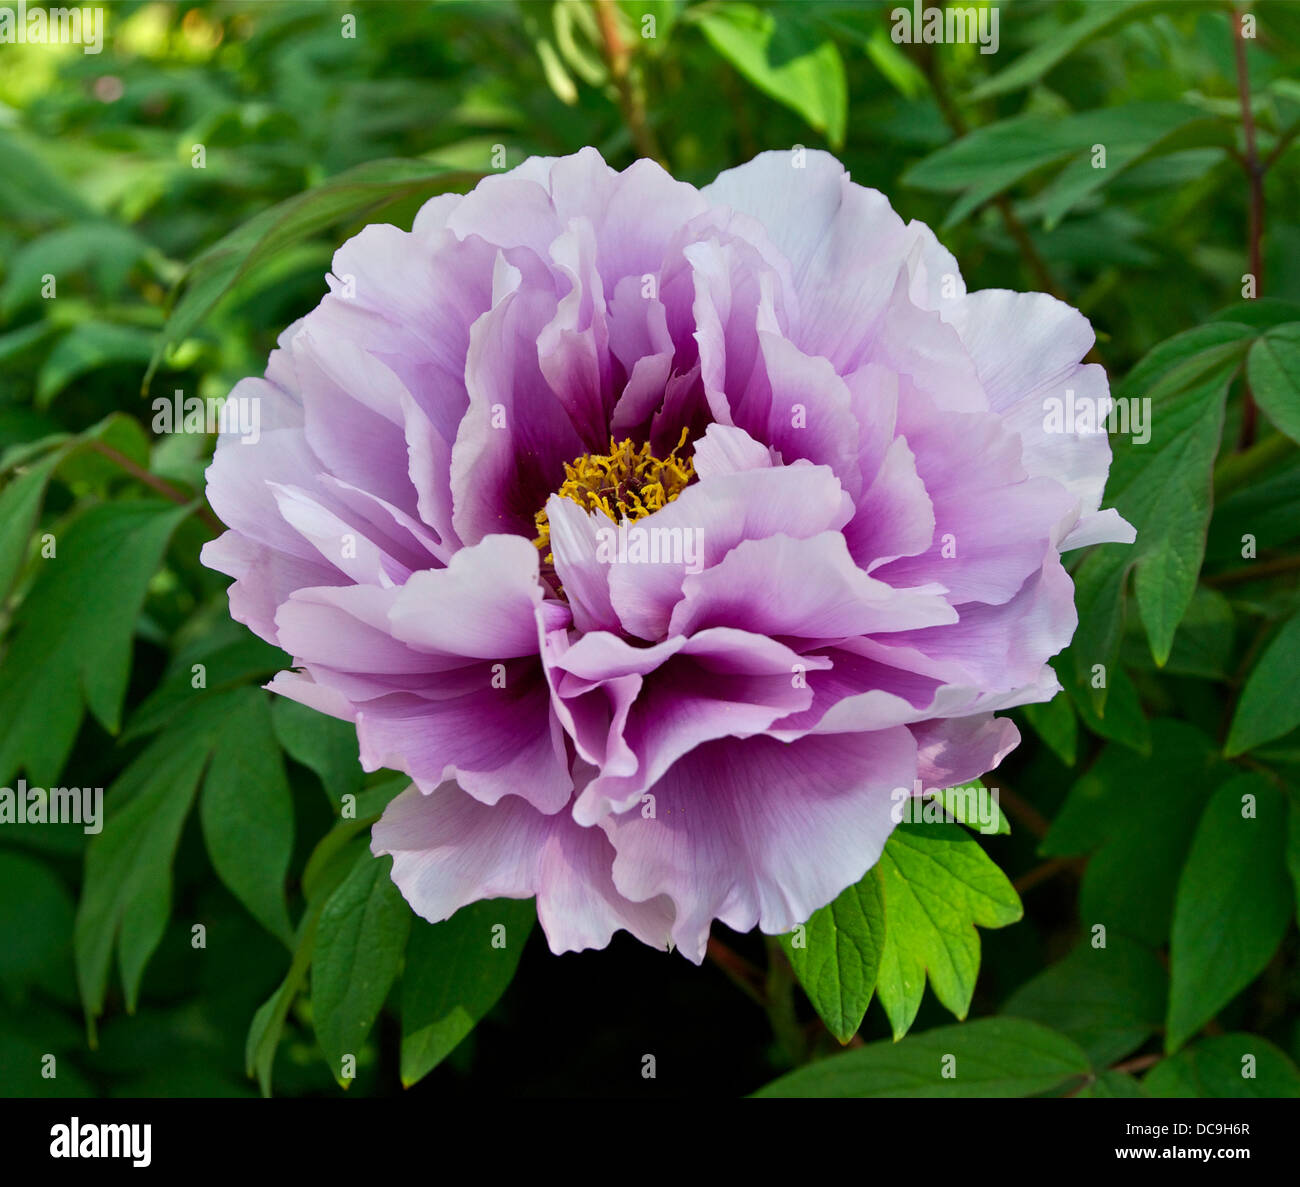 Japanese peony. Paeonia suffruticosa. Flower. Cultivar. Gift of the city of Yatsuka in Japan, to the city of Paris. Stock Photo